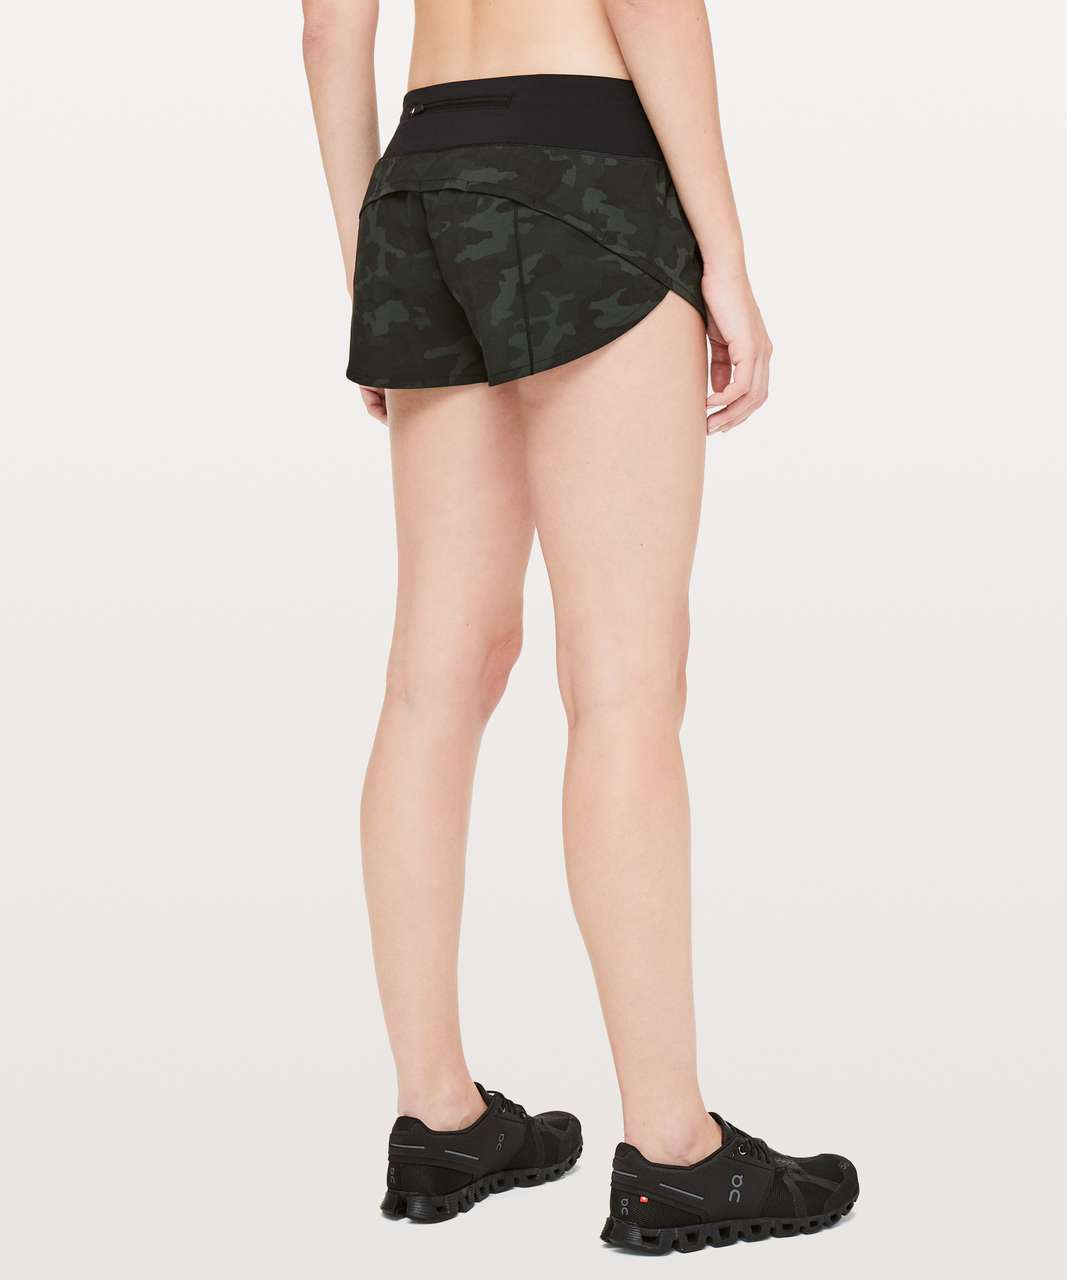 Lululemon Speed Up Short *2.5" - Incognito Camo Multi Gator Green / Black (First Release)